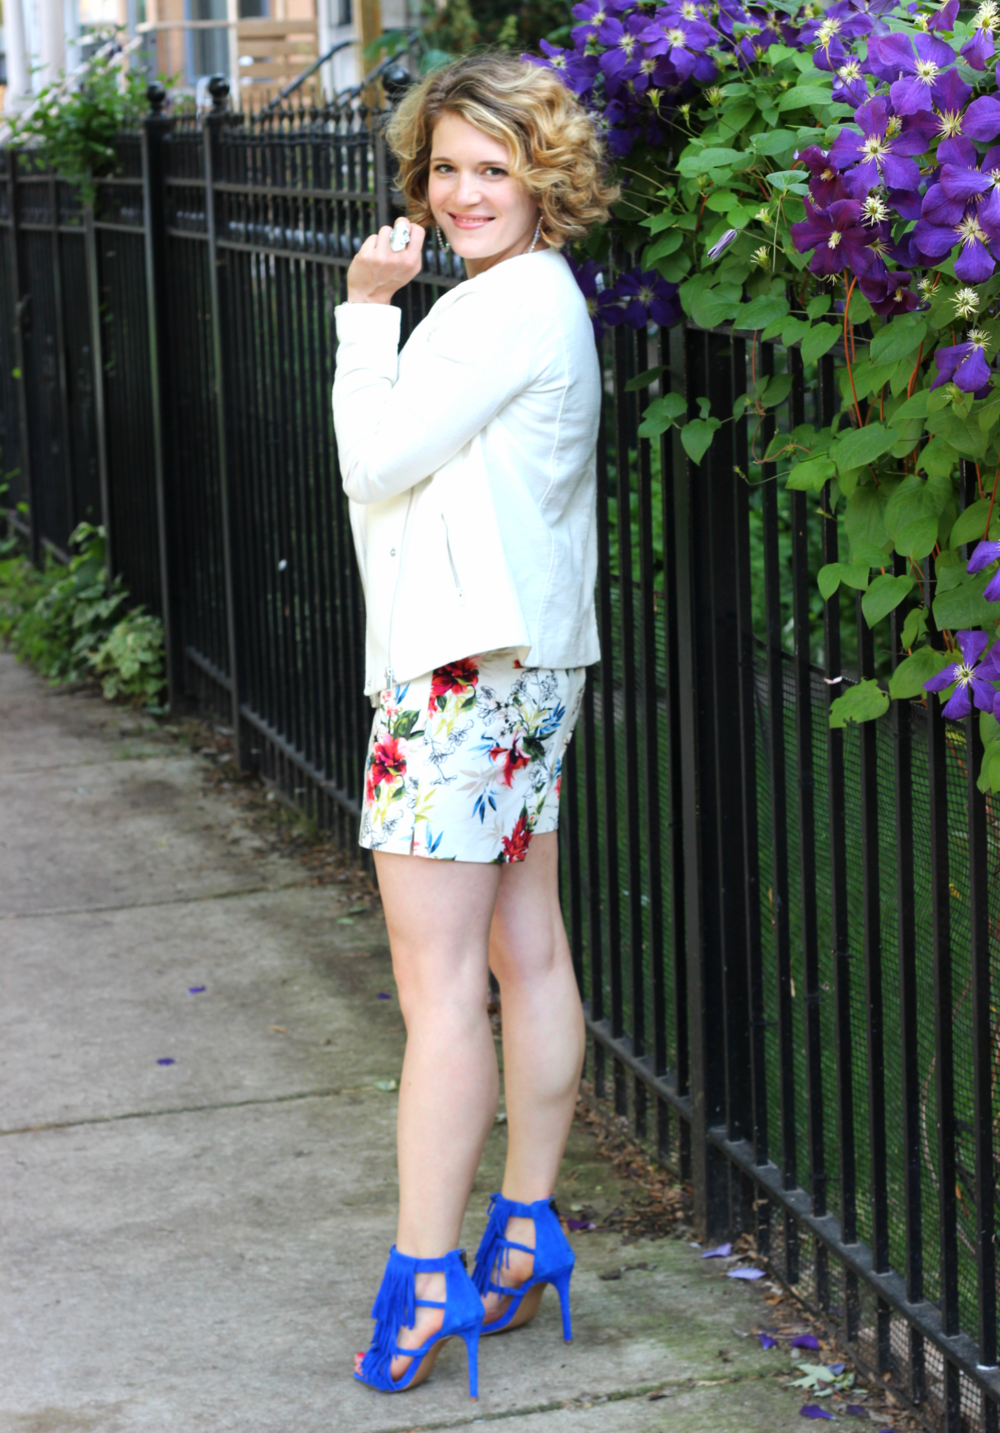 SHORTS WITH HEELS – AN UNLIKELY PAIR YOU SHOULD ROCK